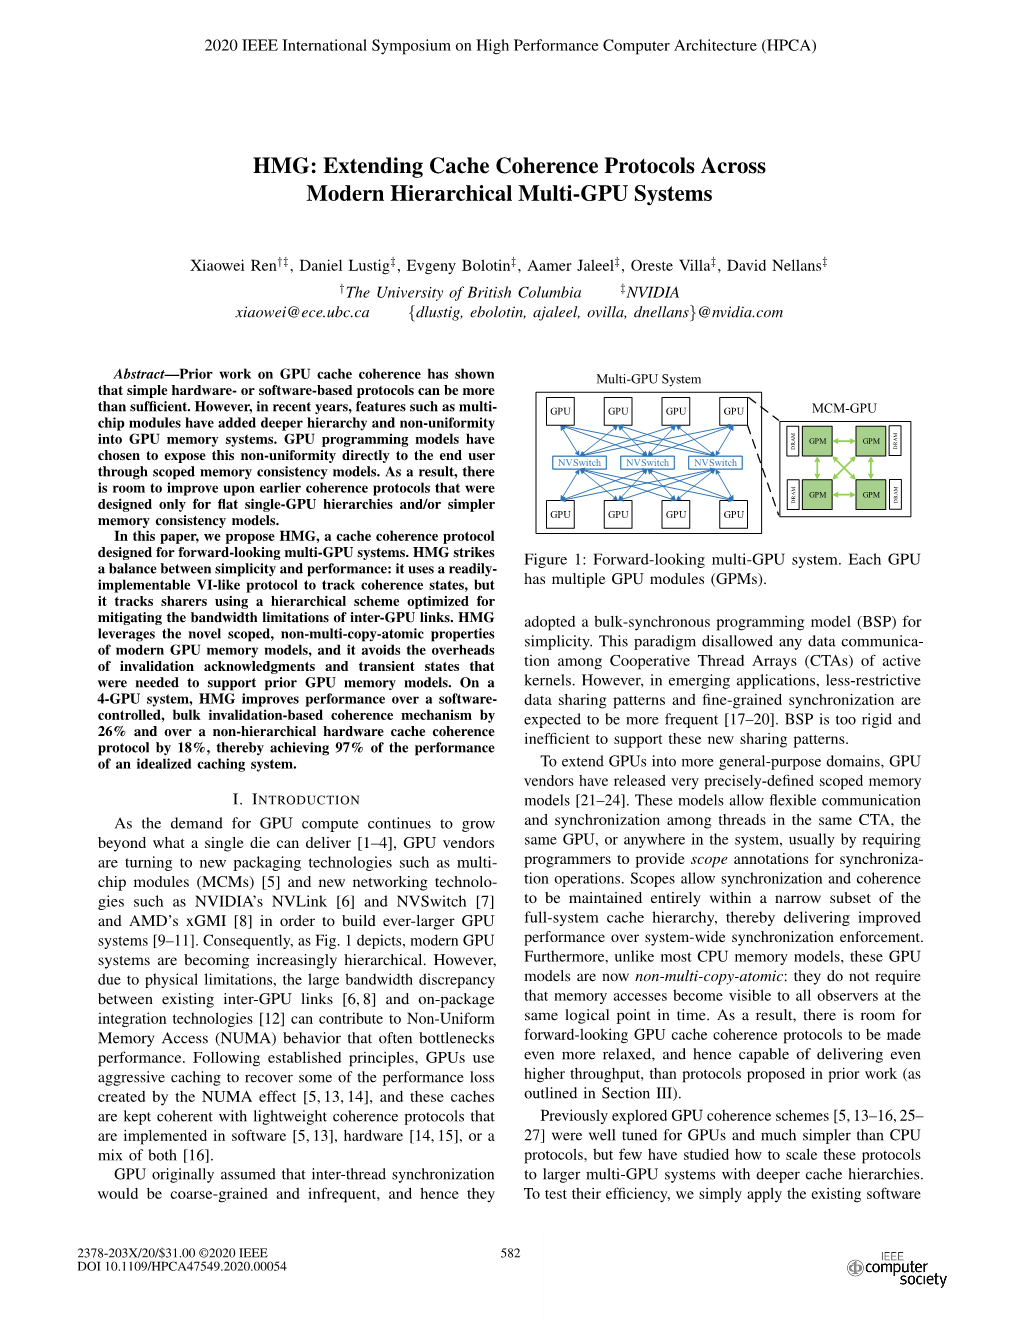 HMG: Extending Cache Coherence Protocols Across Modern Hierarchical Multi-GPU Systems